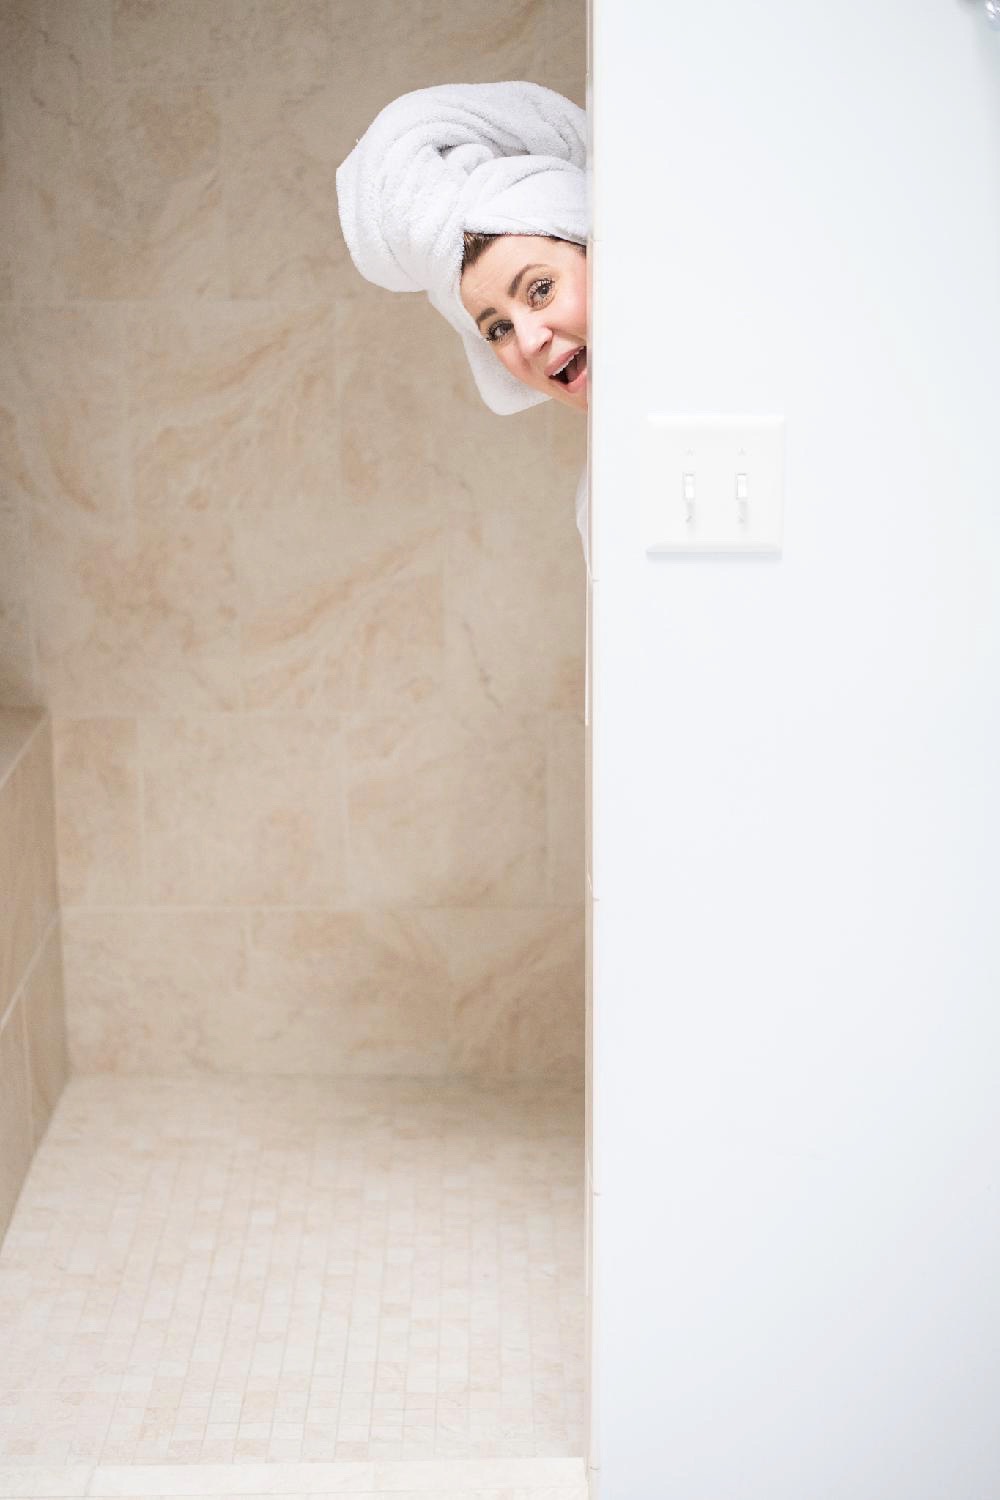 Summer Skin Care Tips with Cetaphil by popular North Carolina beauty blog, Coffee Beans and Bobby Pins: image of a woman poking her head  out from inside her walk-in shower.